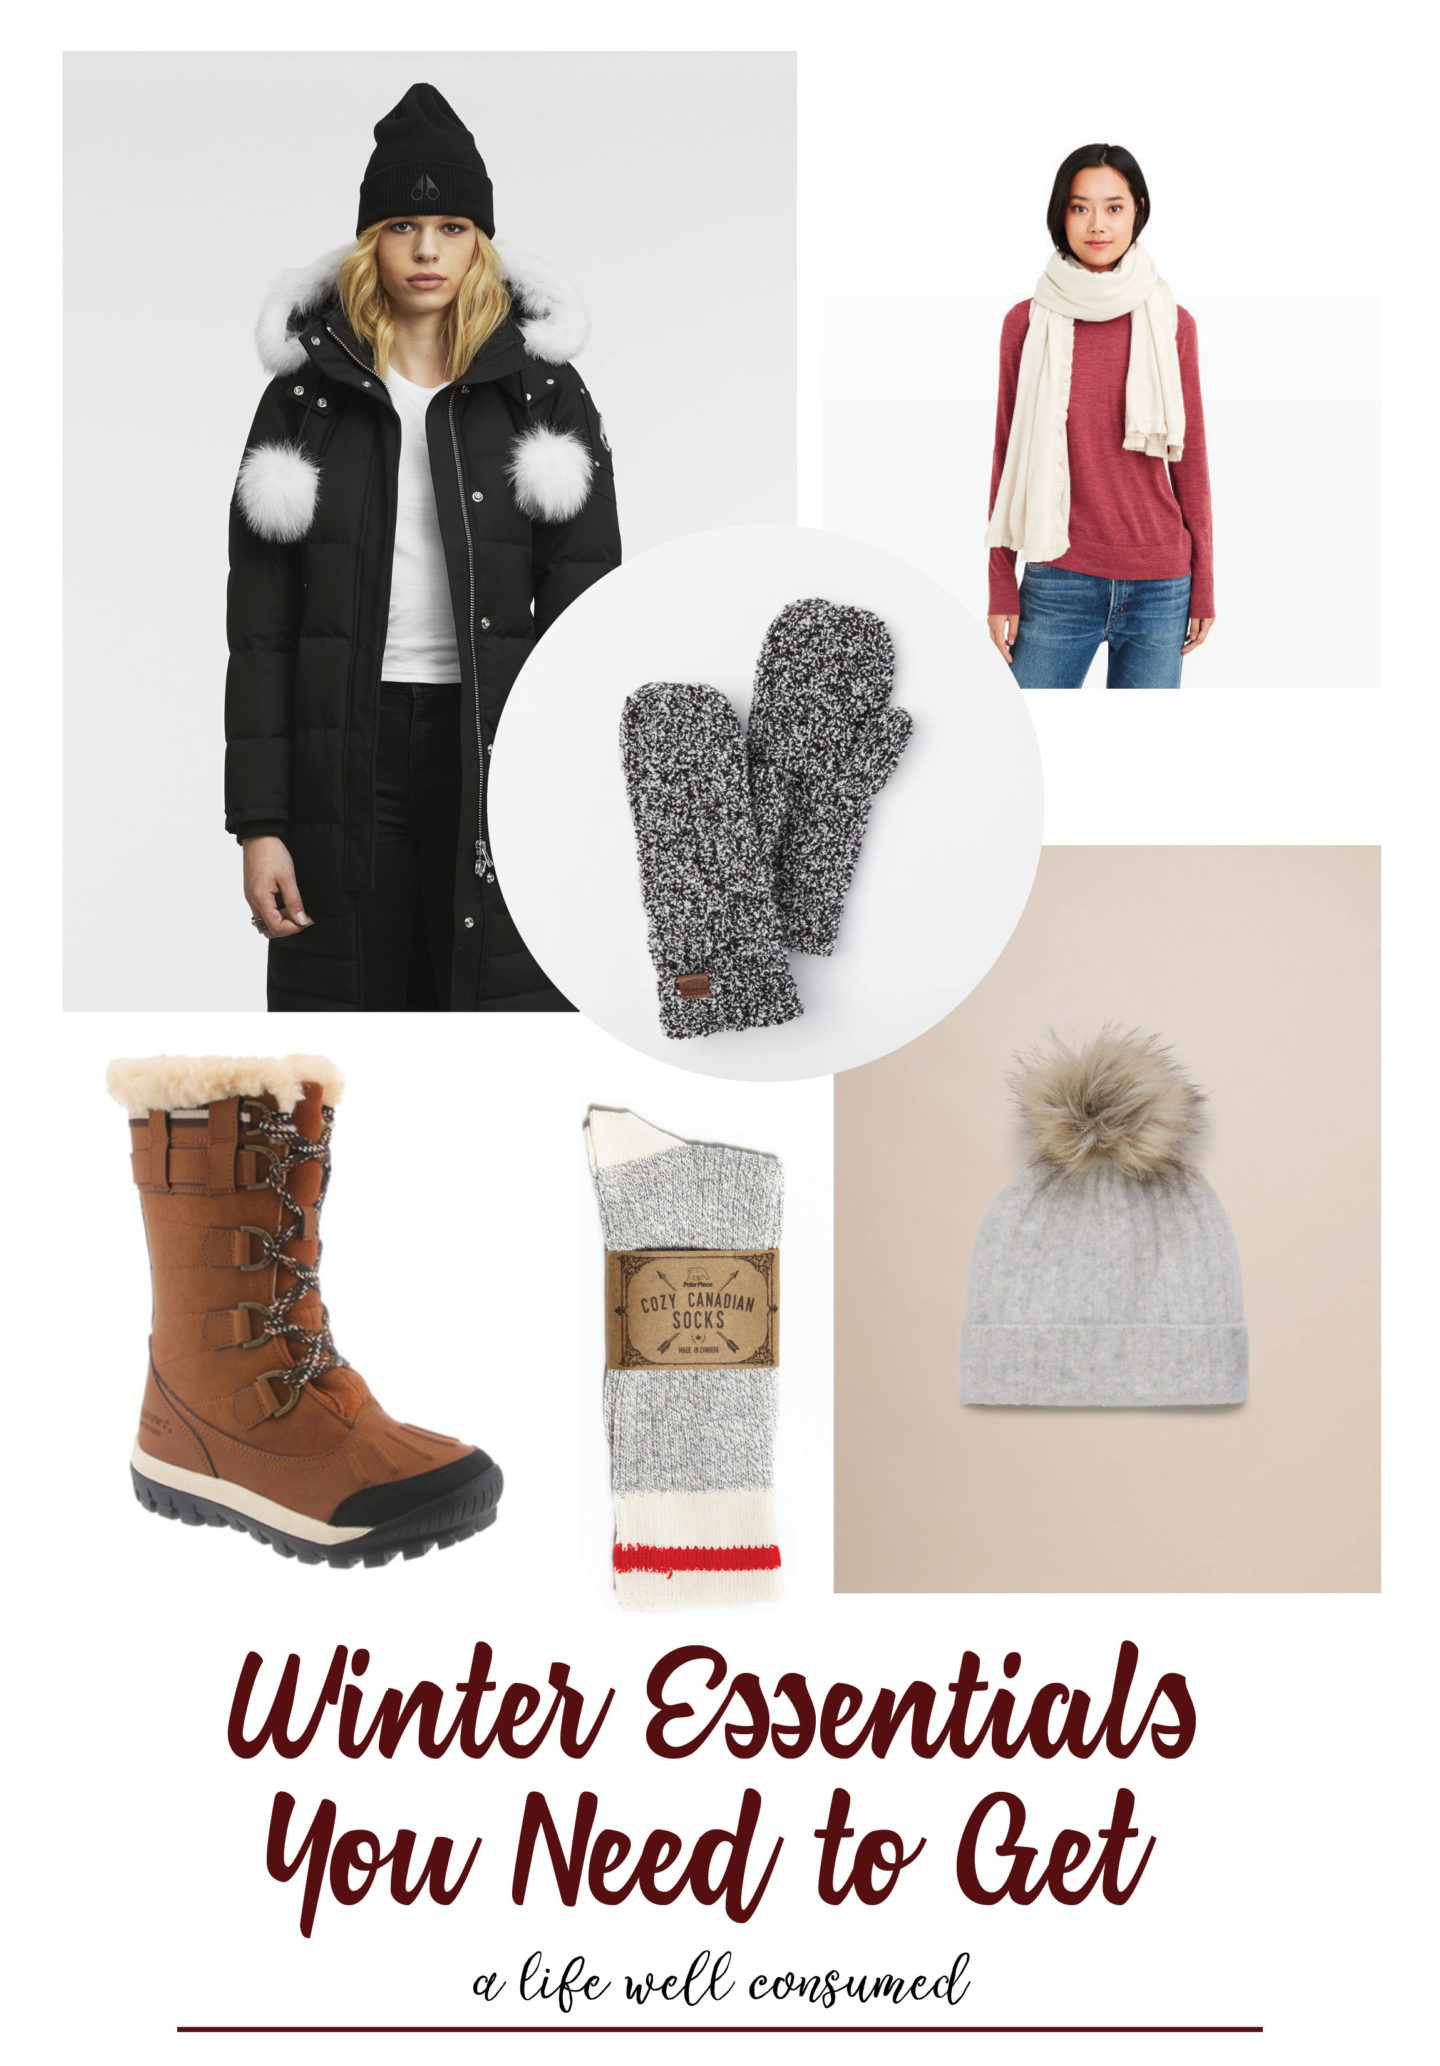 The 6 Winter Essentials You Need To Get